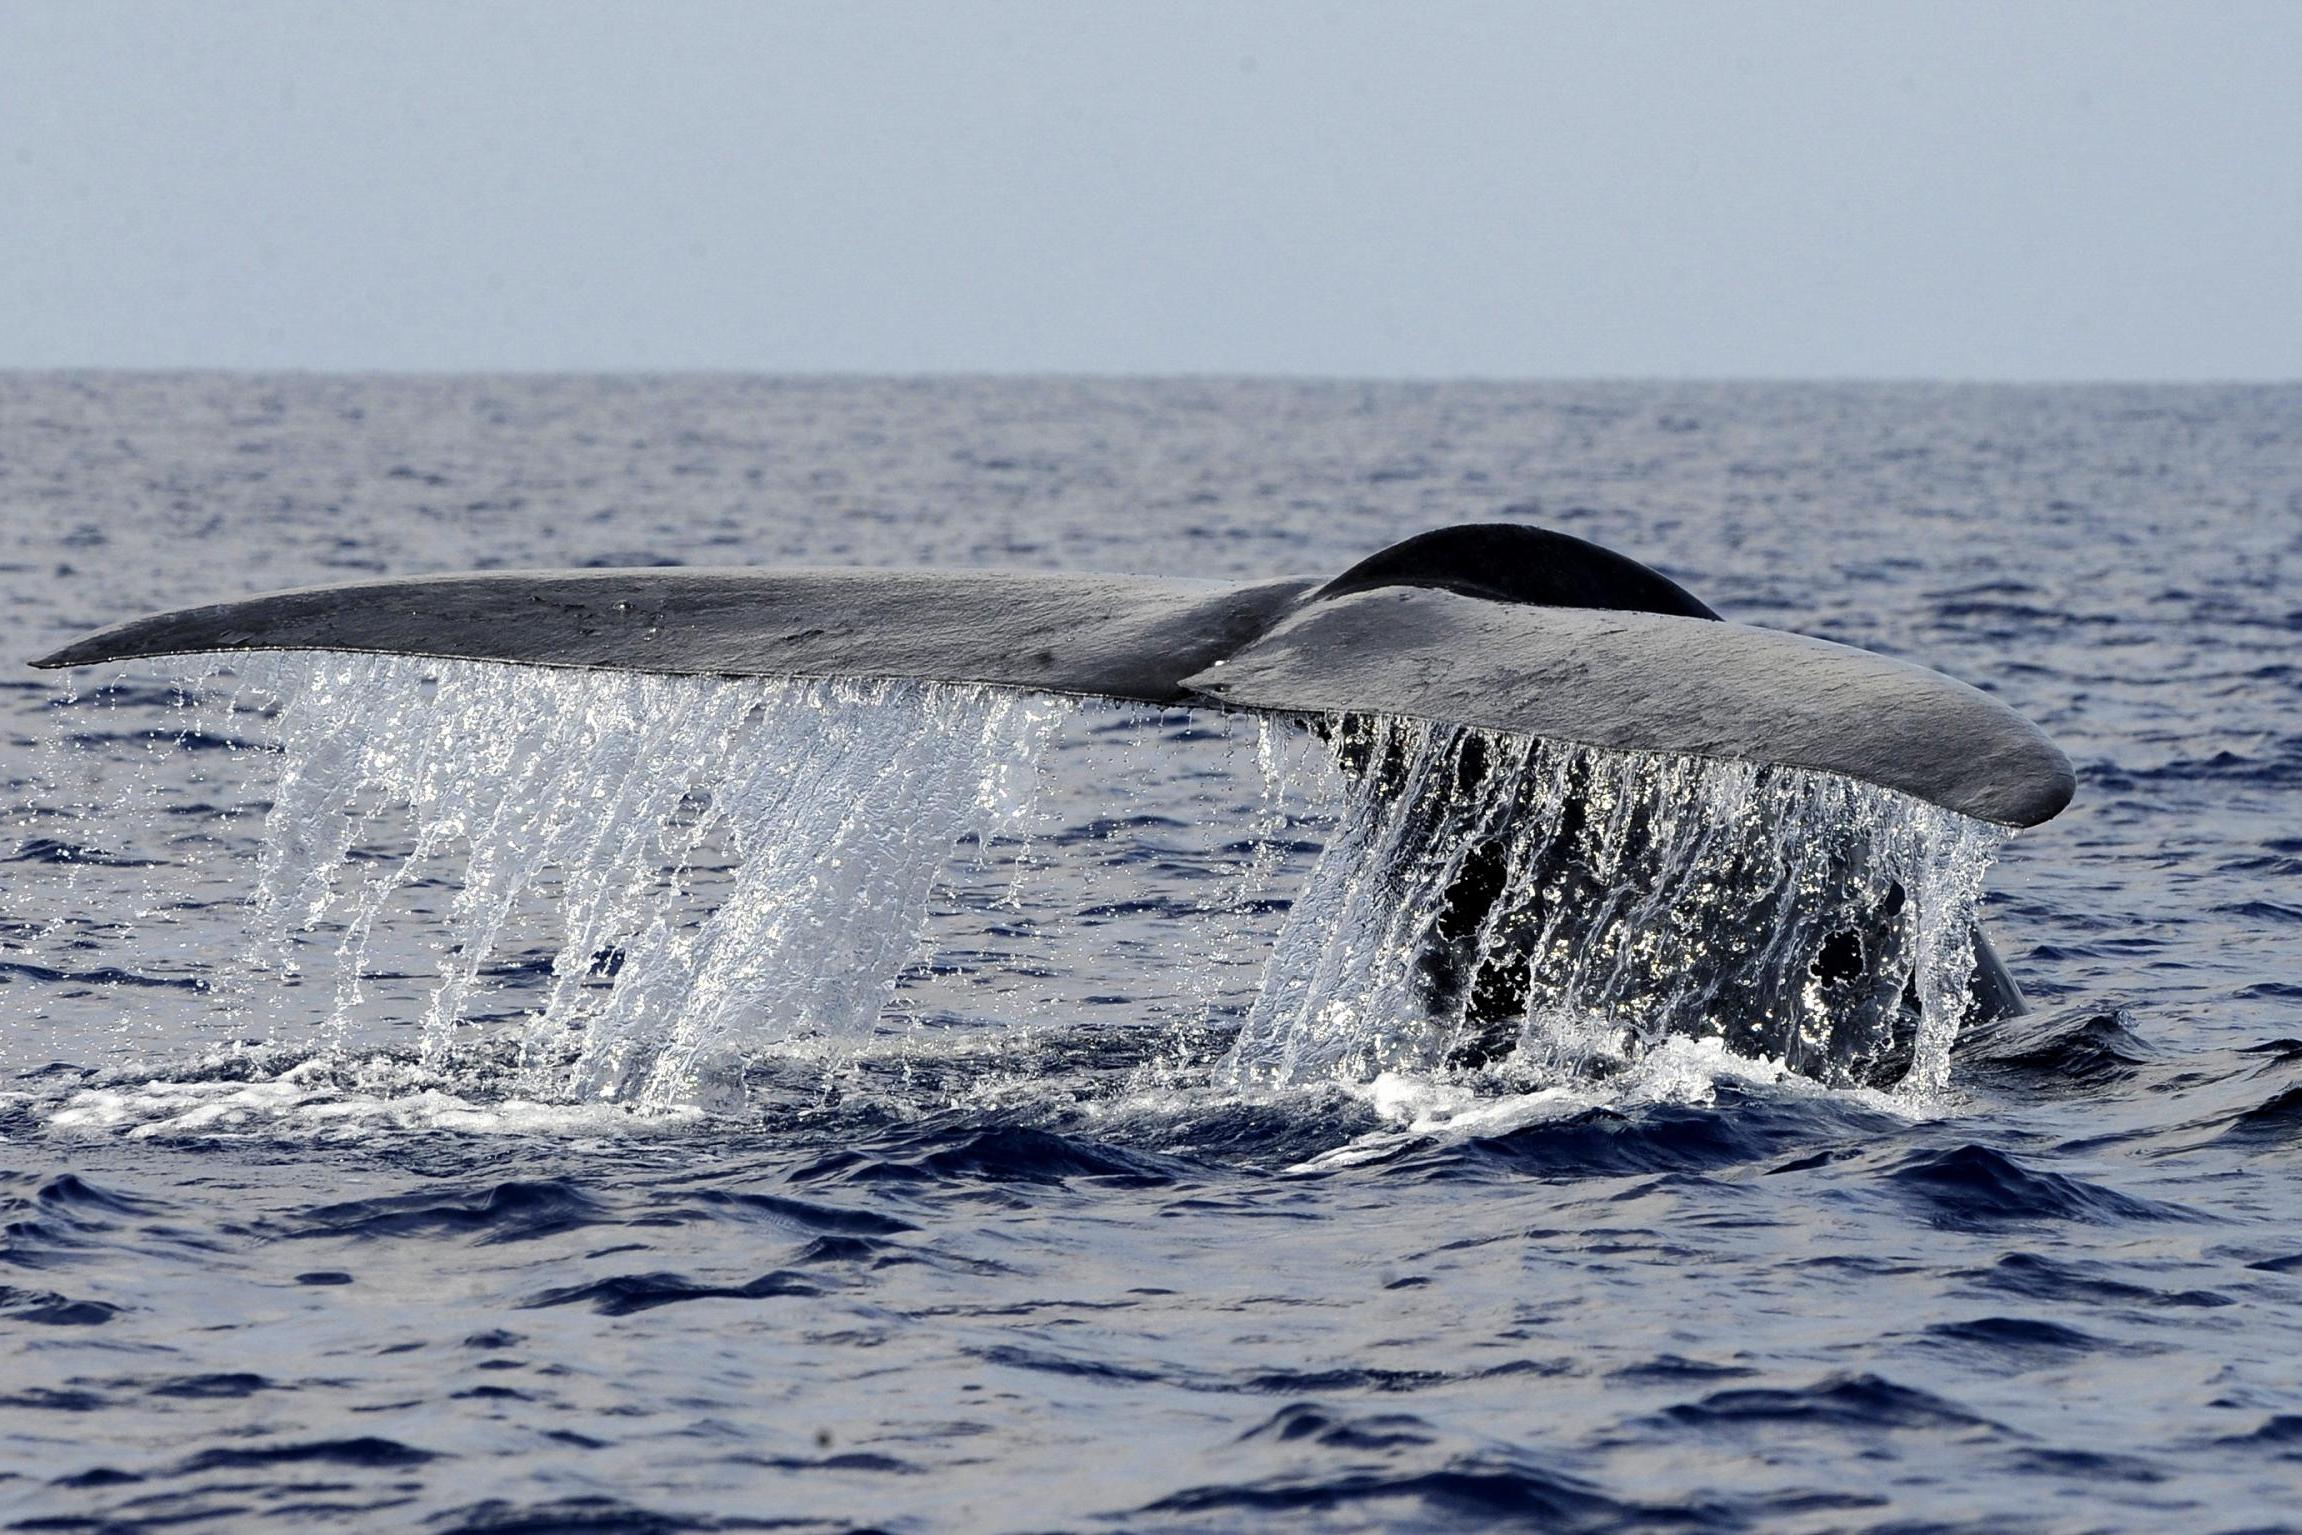 Three British sailors rescued from Atlantic Ocean after yacht collides with whale